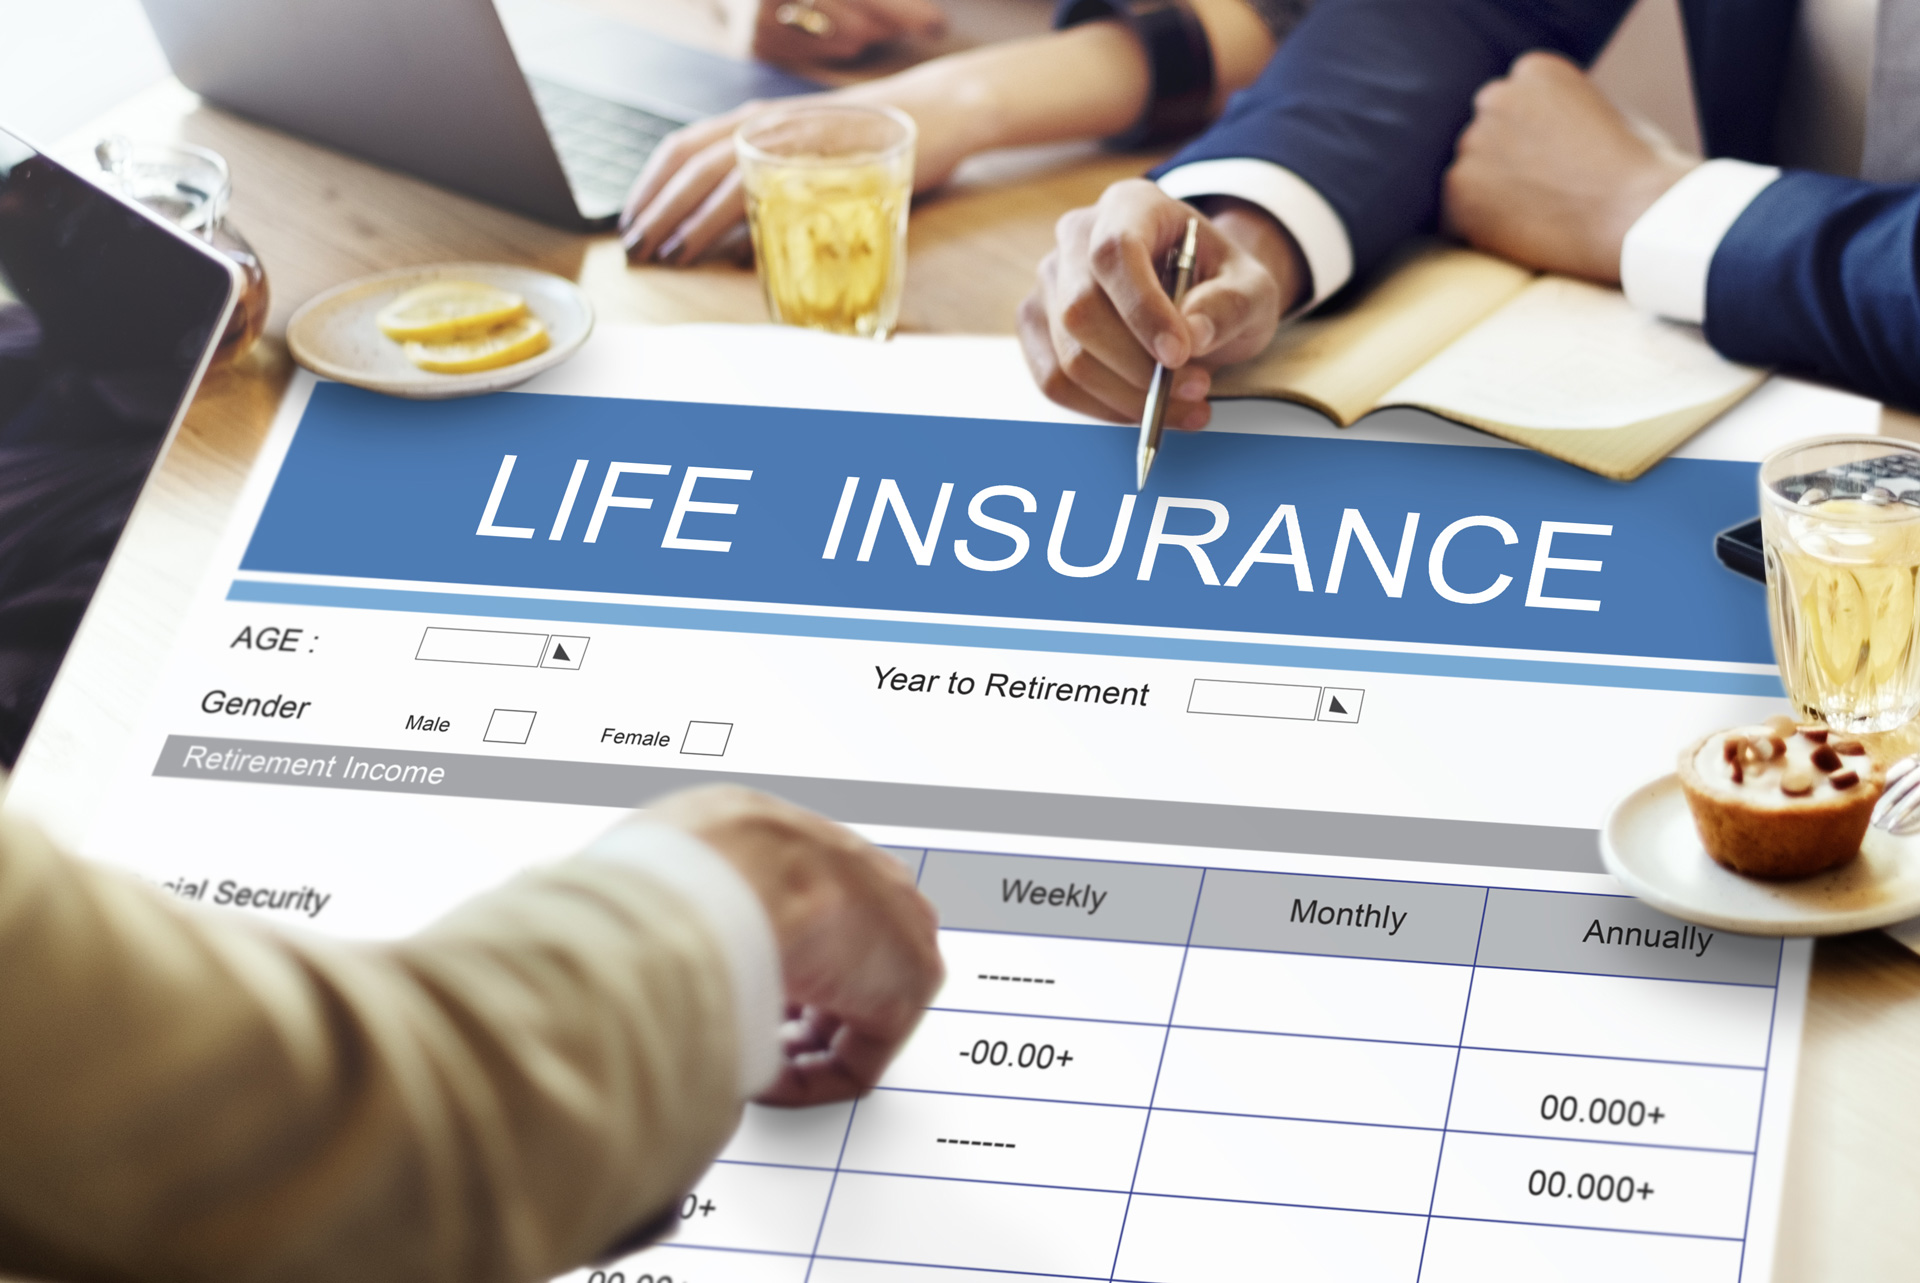 Who Is Really Ideal for Life Insurance?